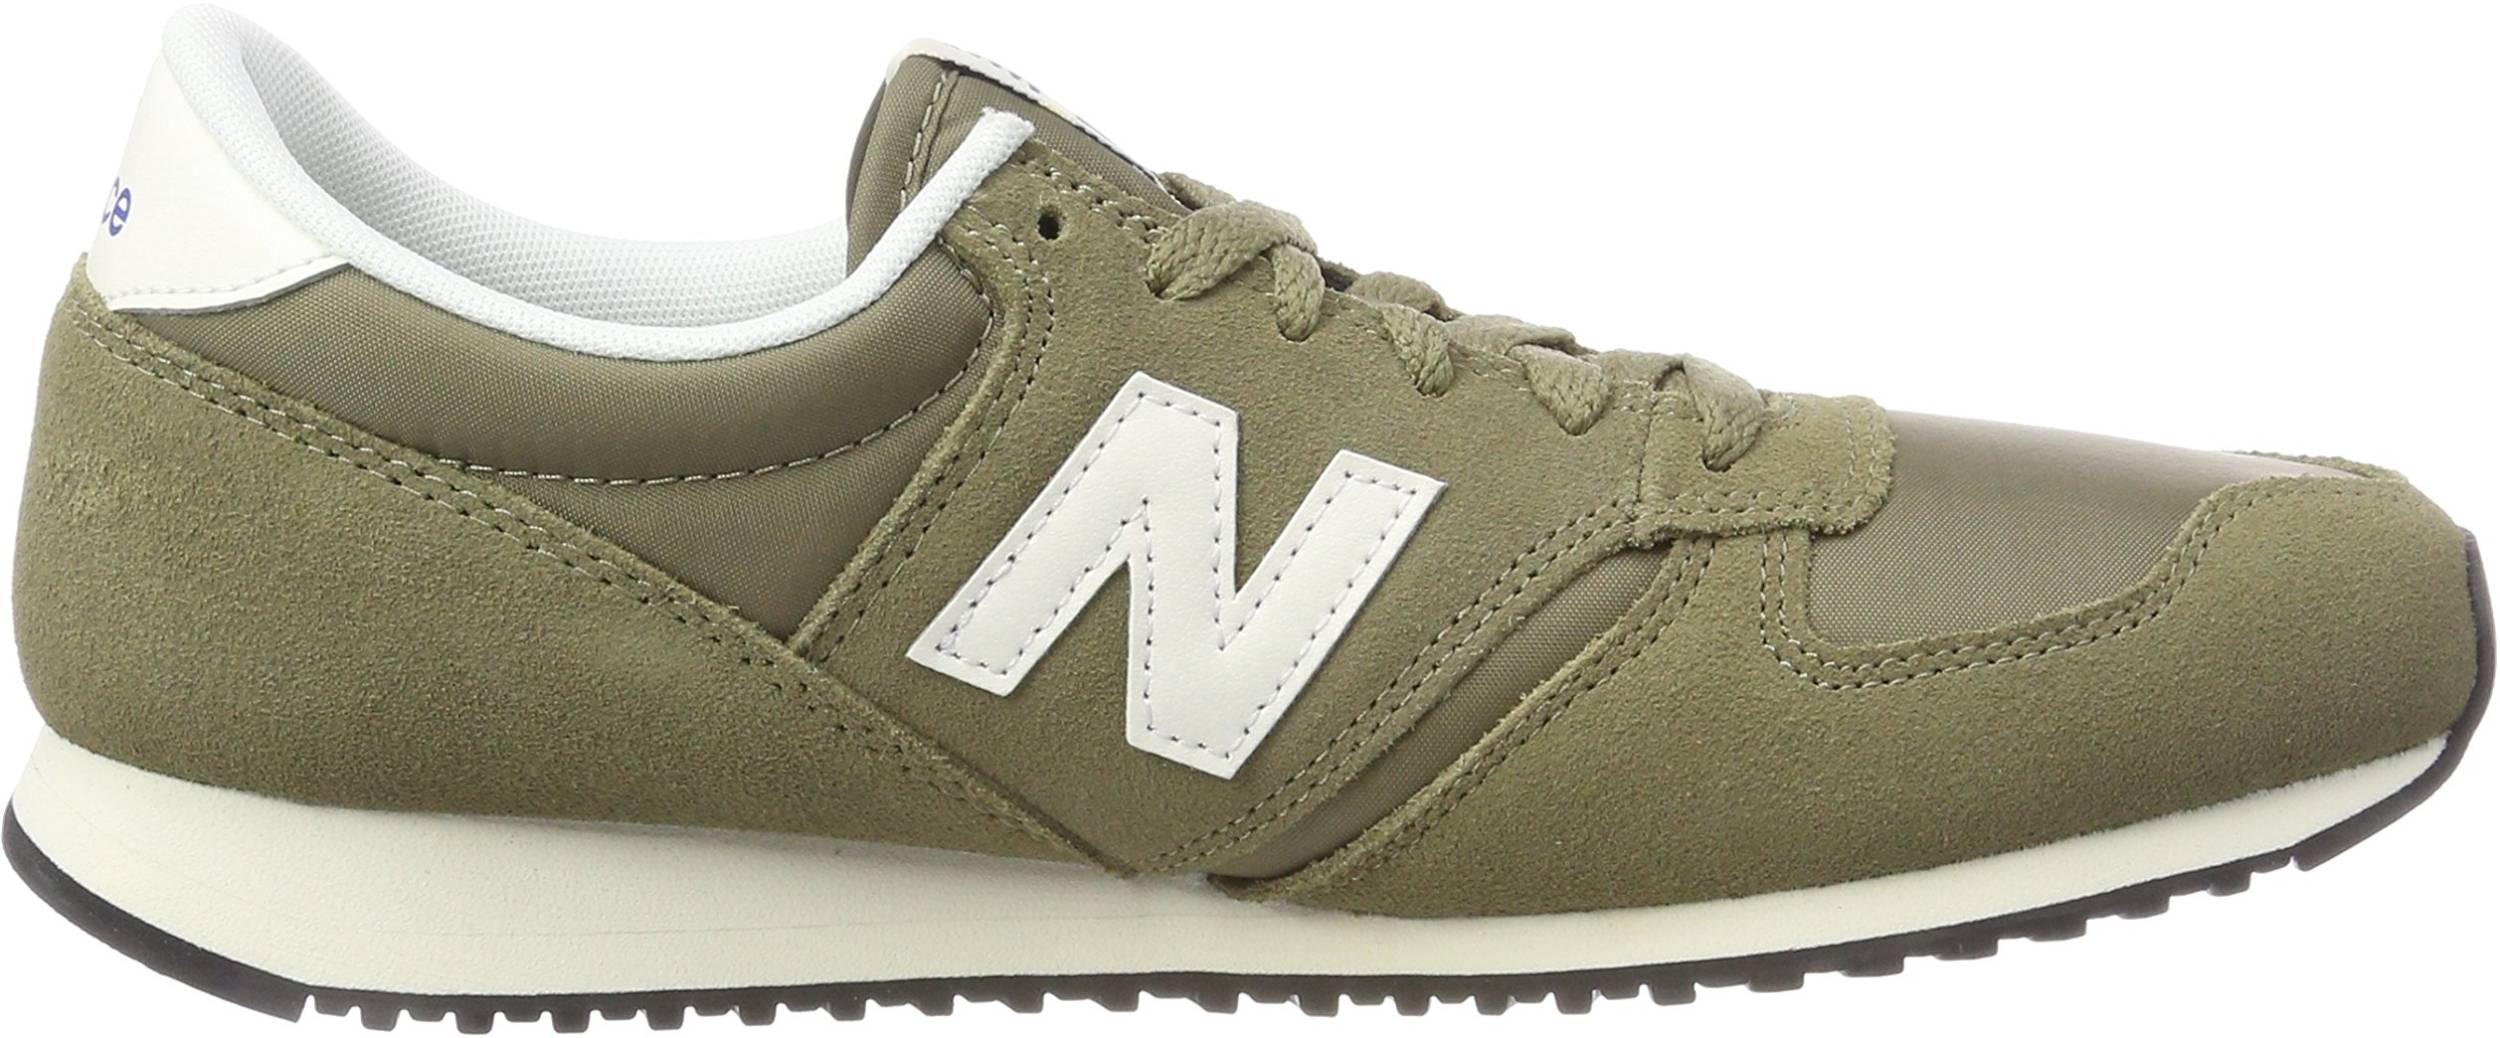 New Balance 420 sneakers (only $45) | RunRepeat